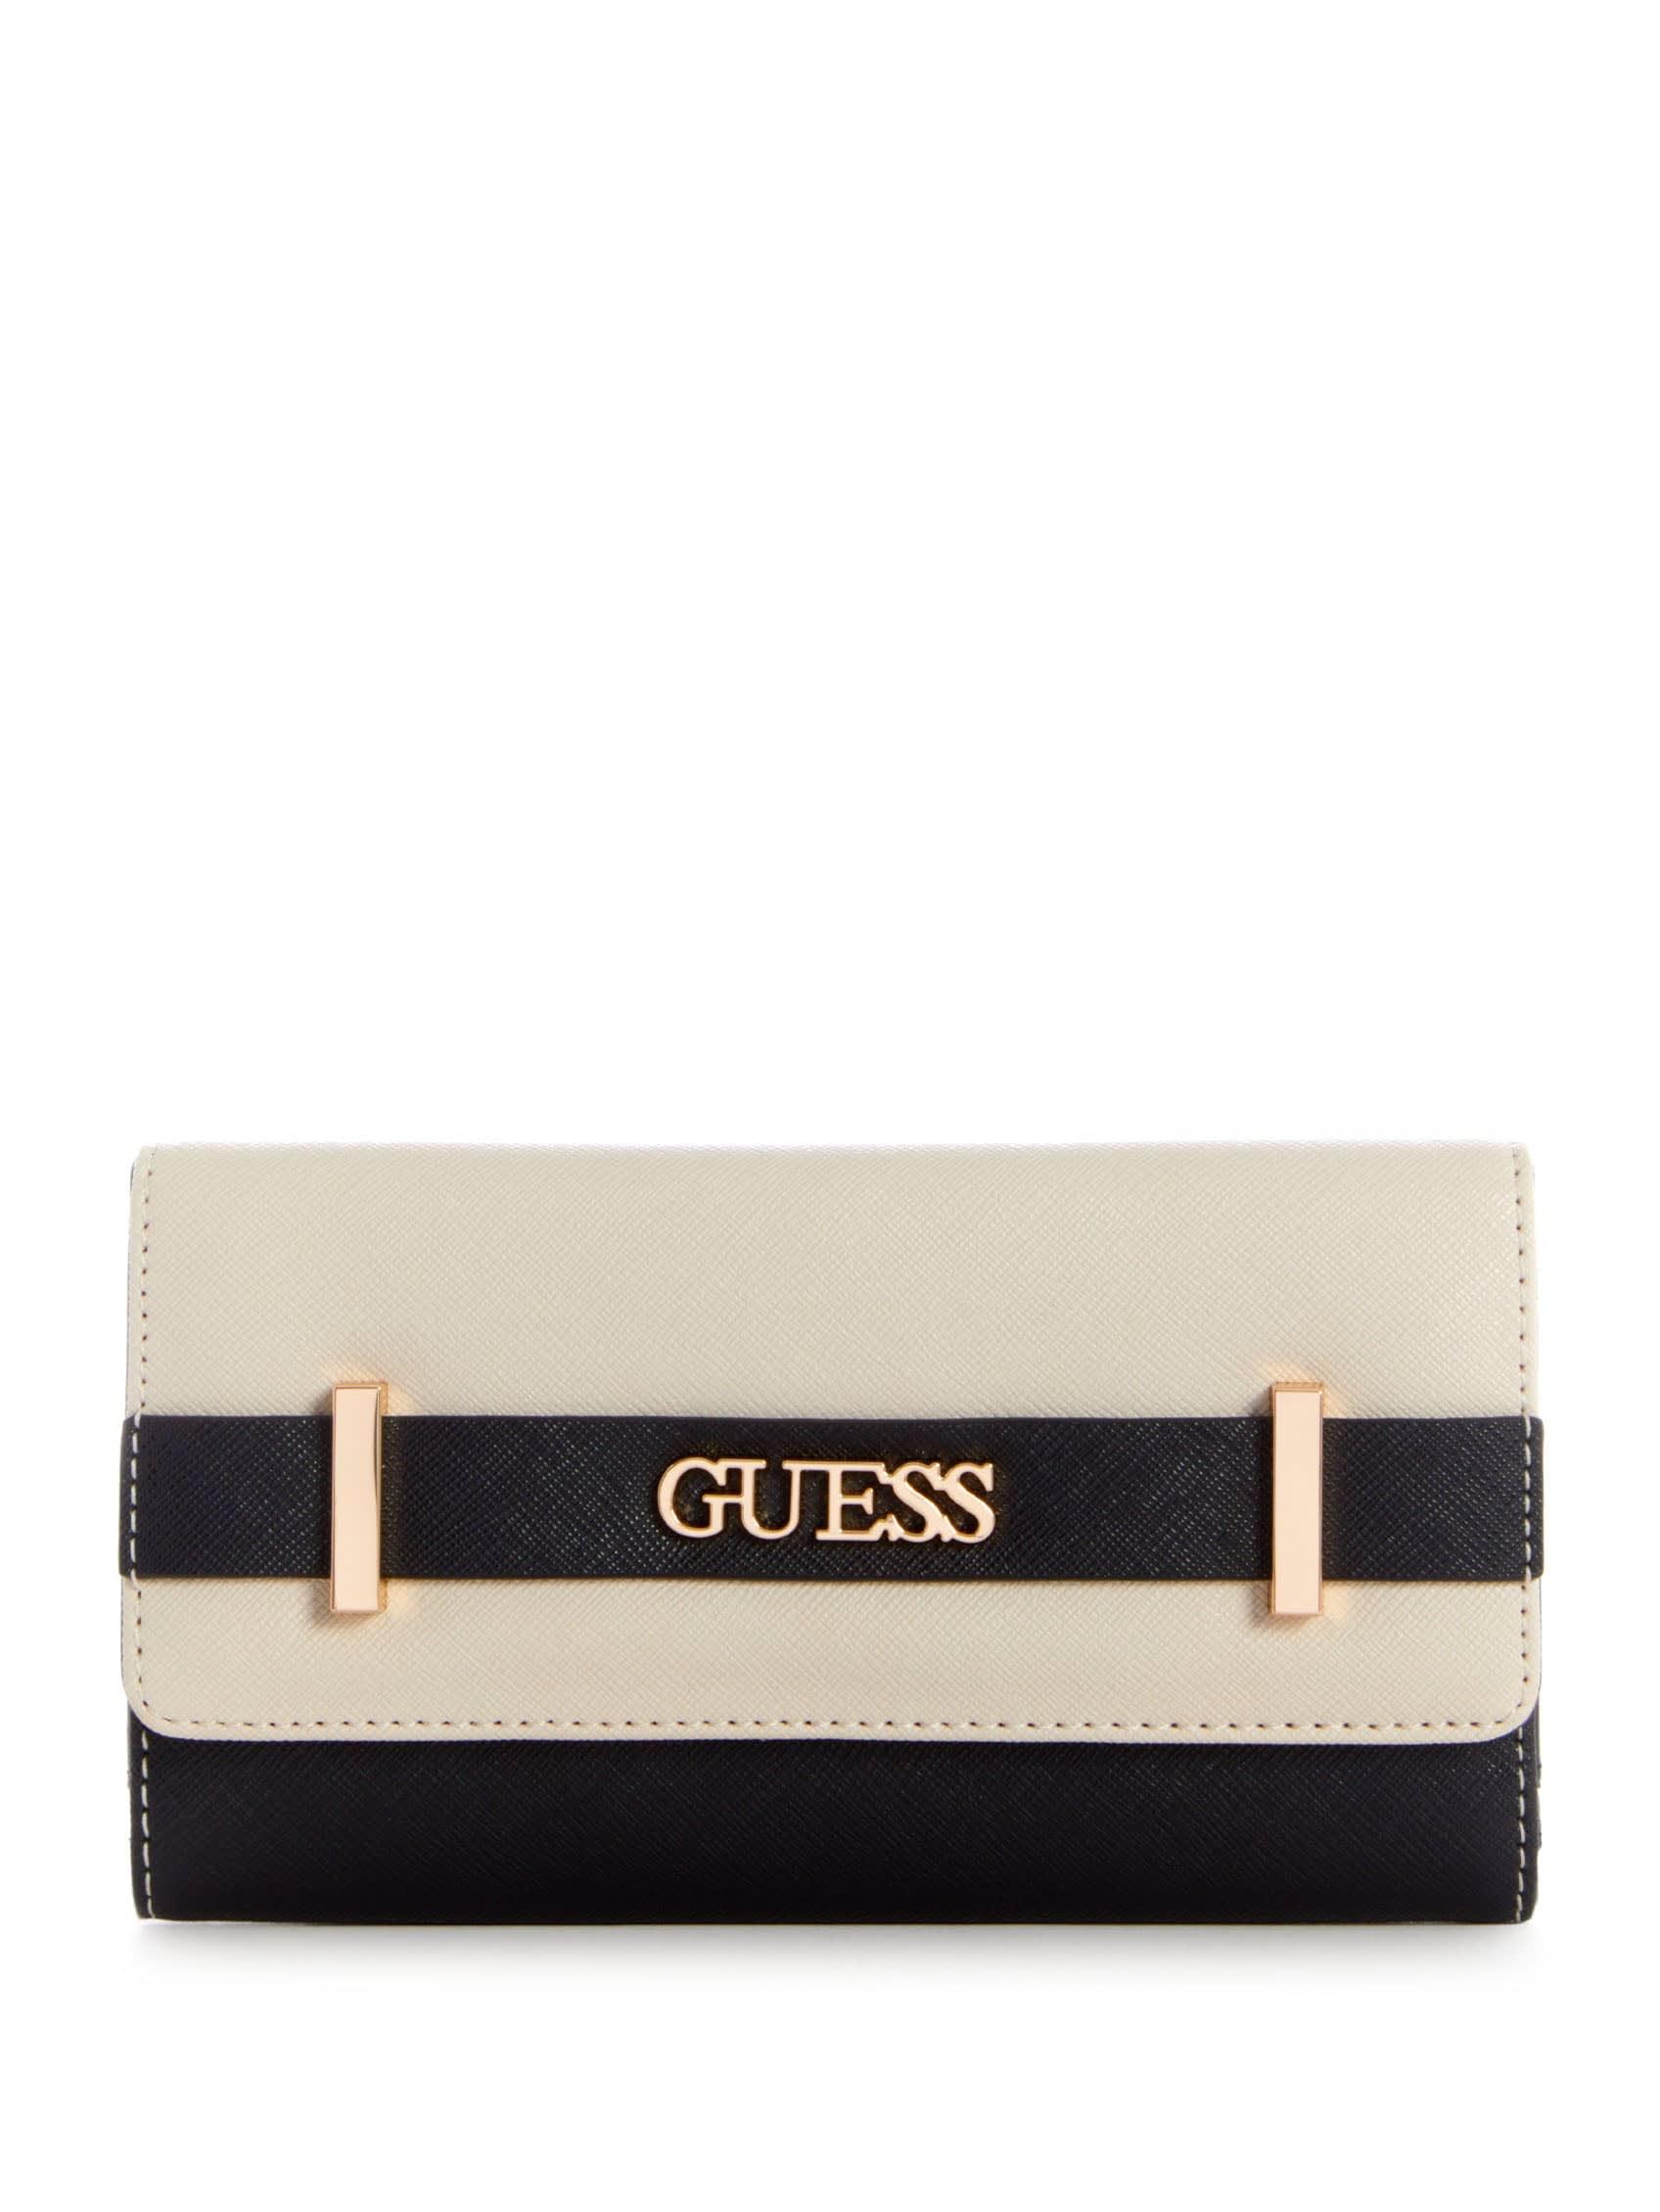 Guess Factory Thea Slim Clutch in White | Lyst